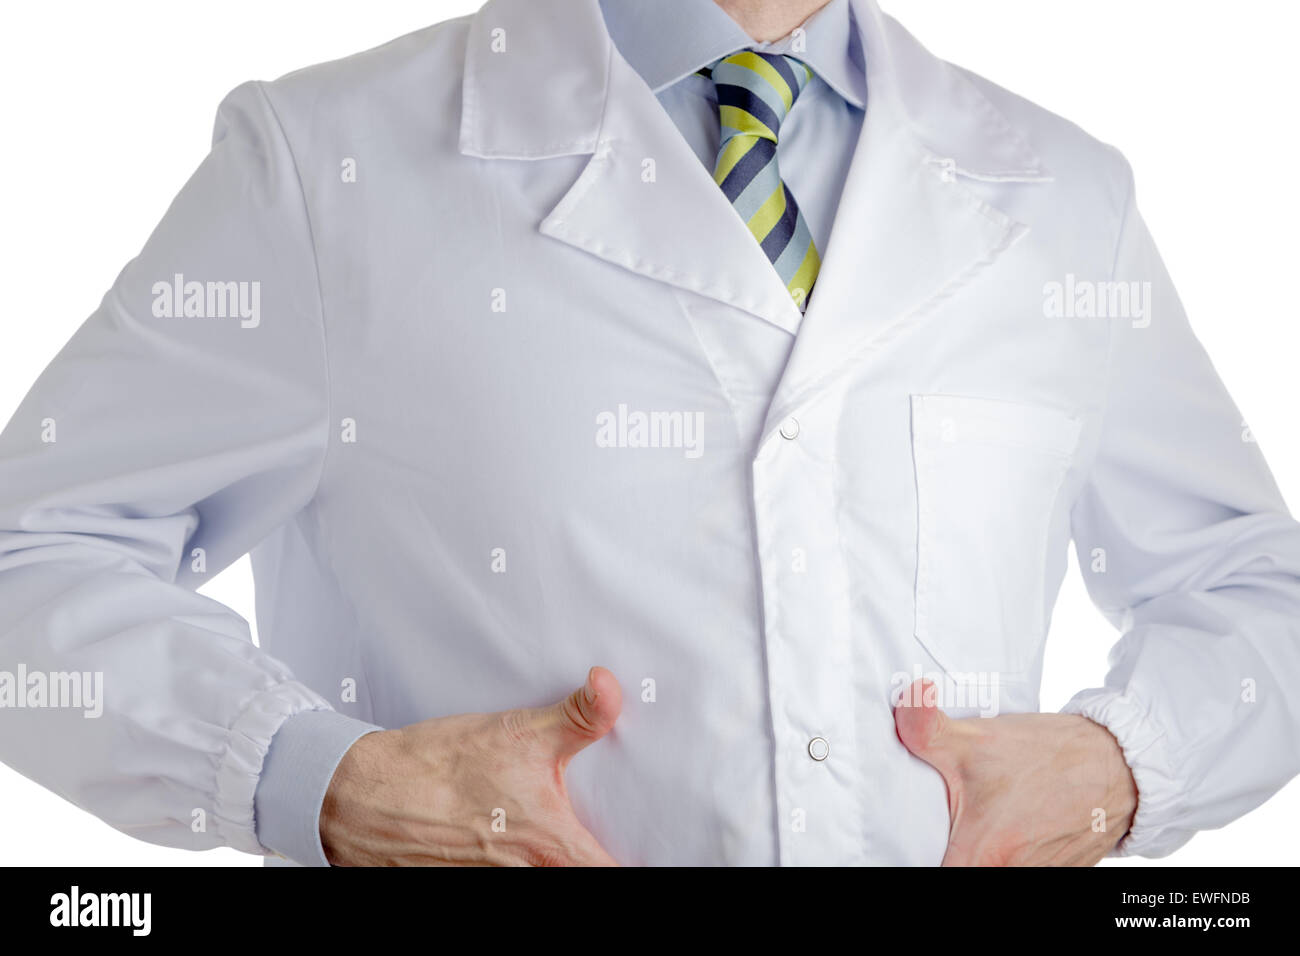 Man dressed with medical white coat, light blue shirt and glossy regimental tie with dark blue, light blue and green stripes, is pointing to his belly with both hands, driving attention to his stomach Stock Photo